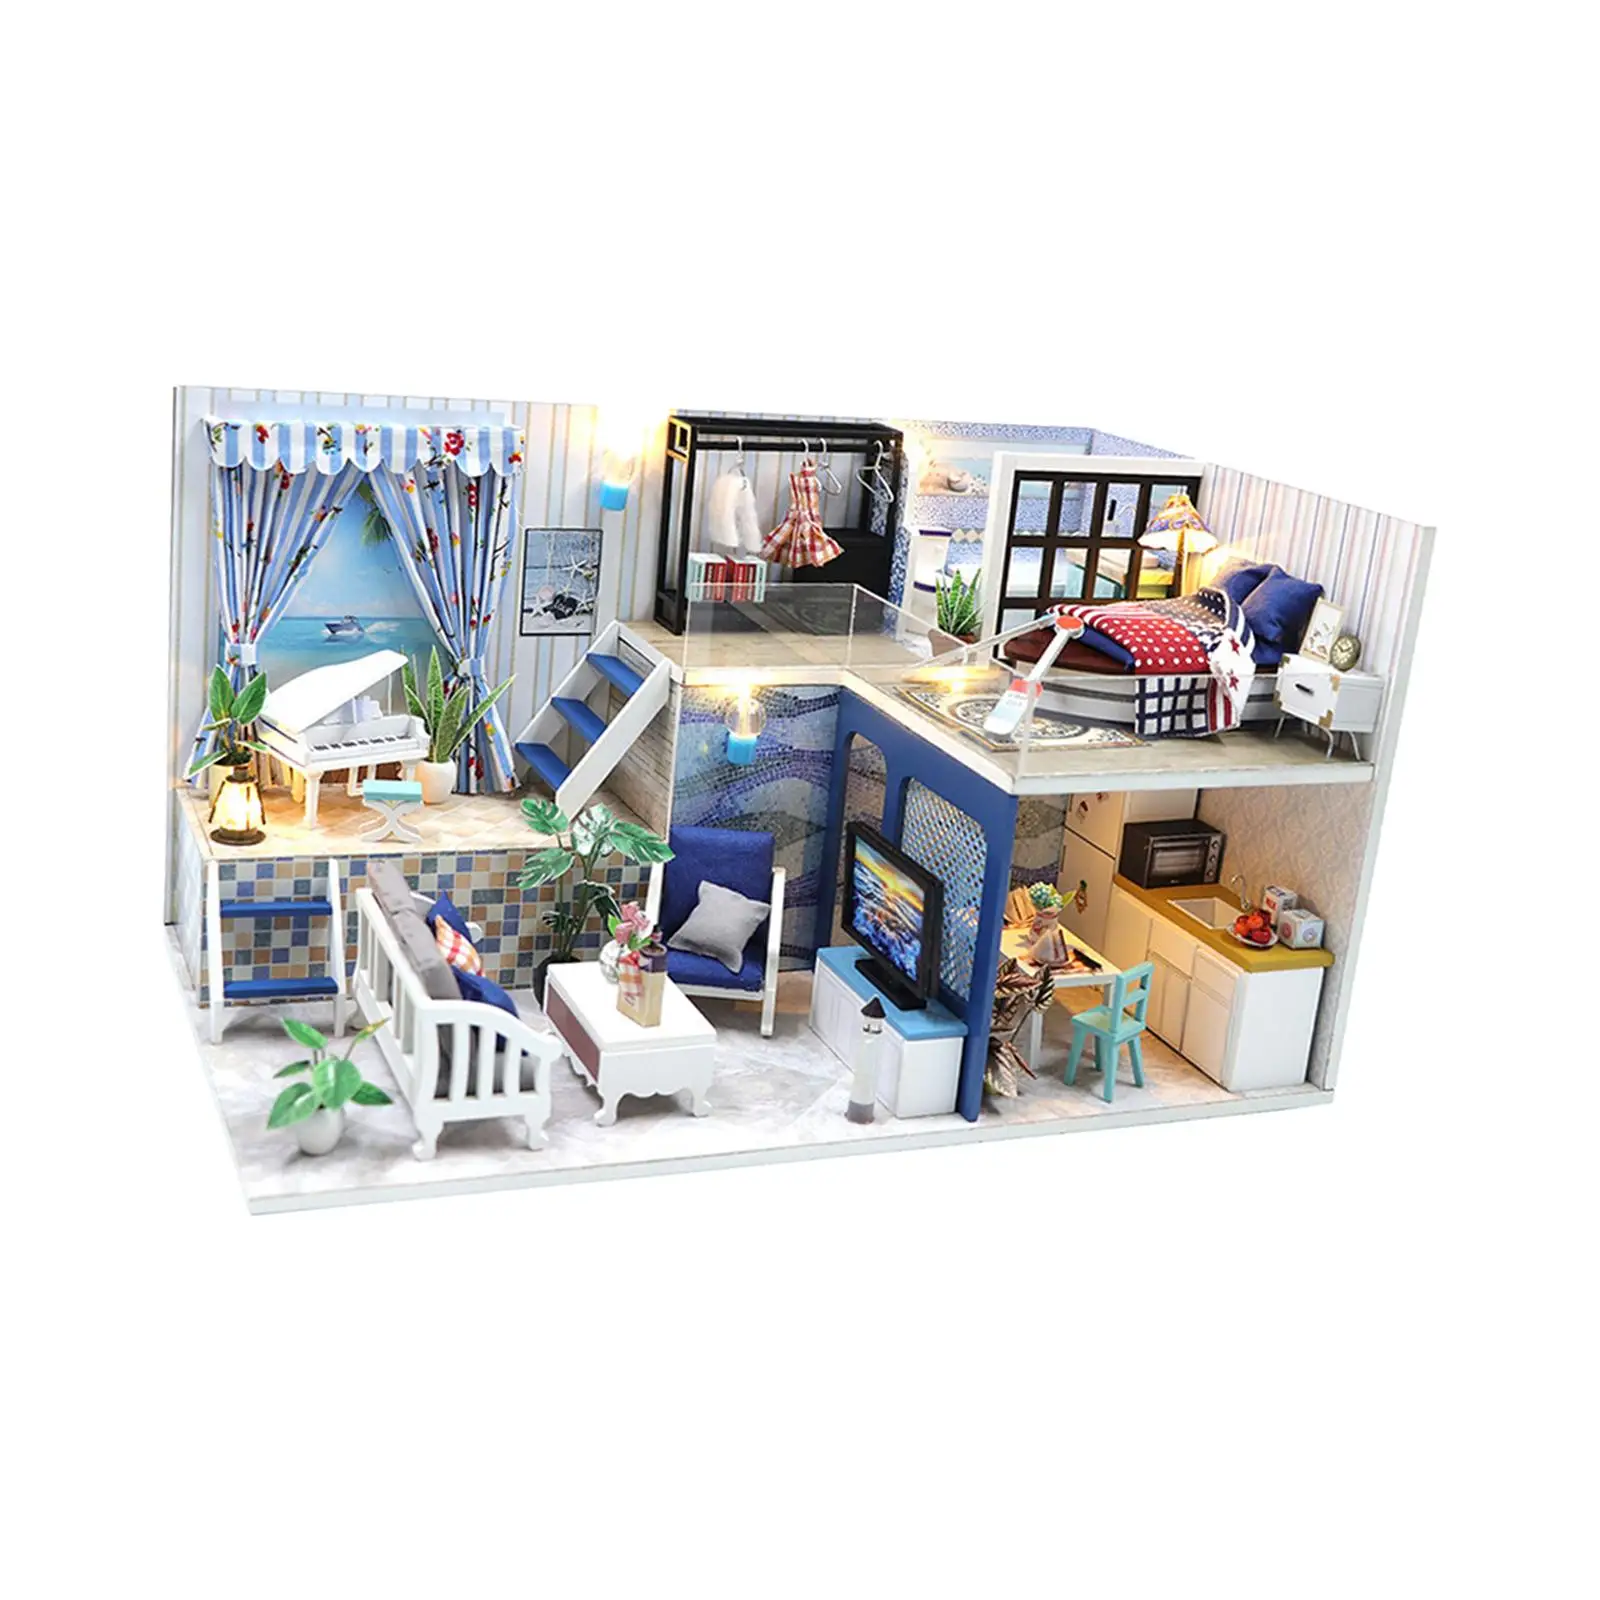 Assemble Kit Exquisite Creative Unfinished with Furniture DIY Miniature dollhouse for Decor Birthday Gift Collectibles